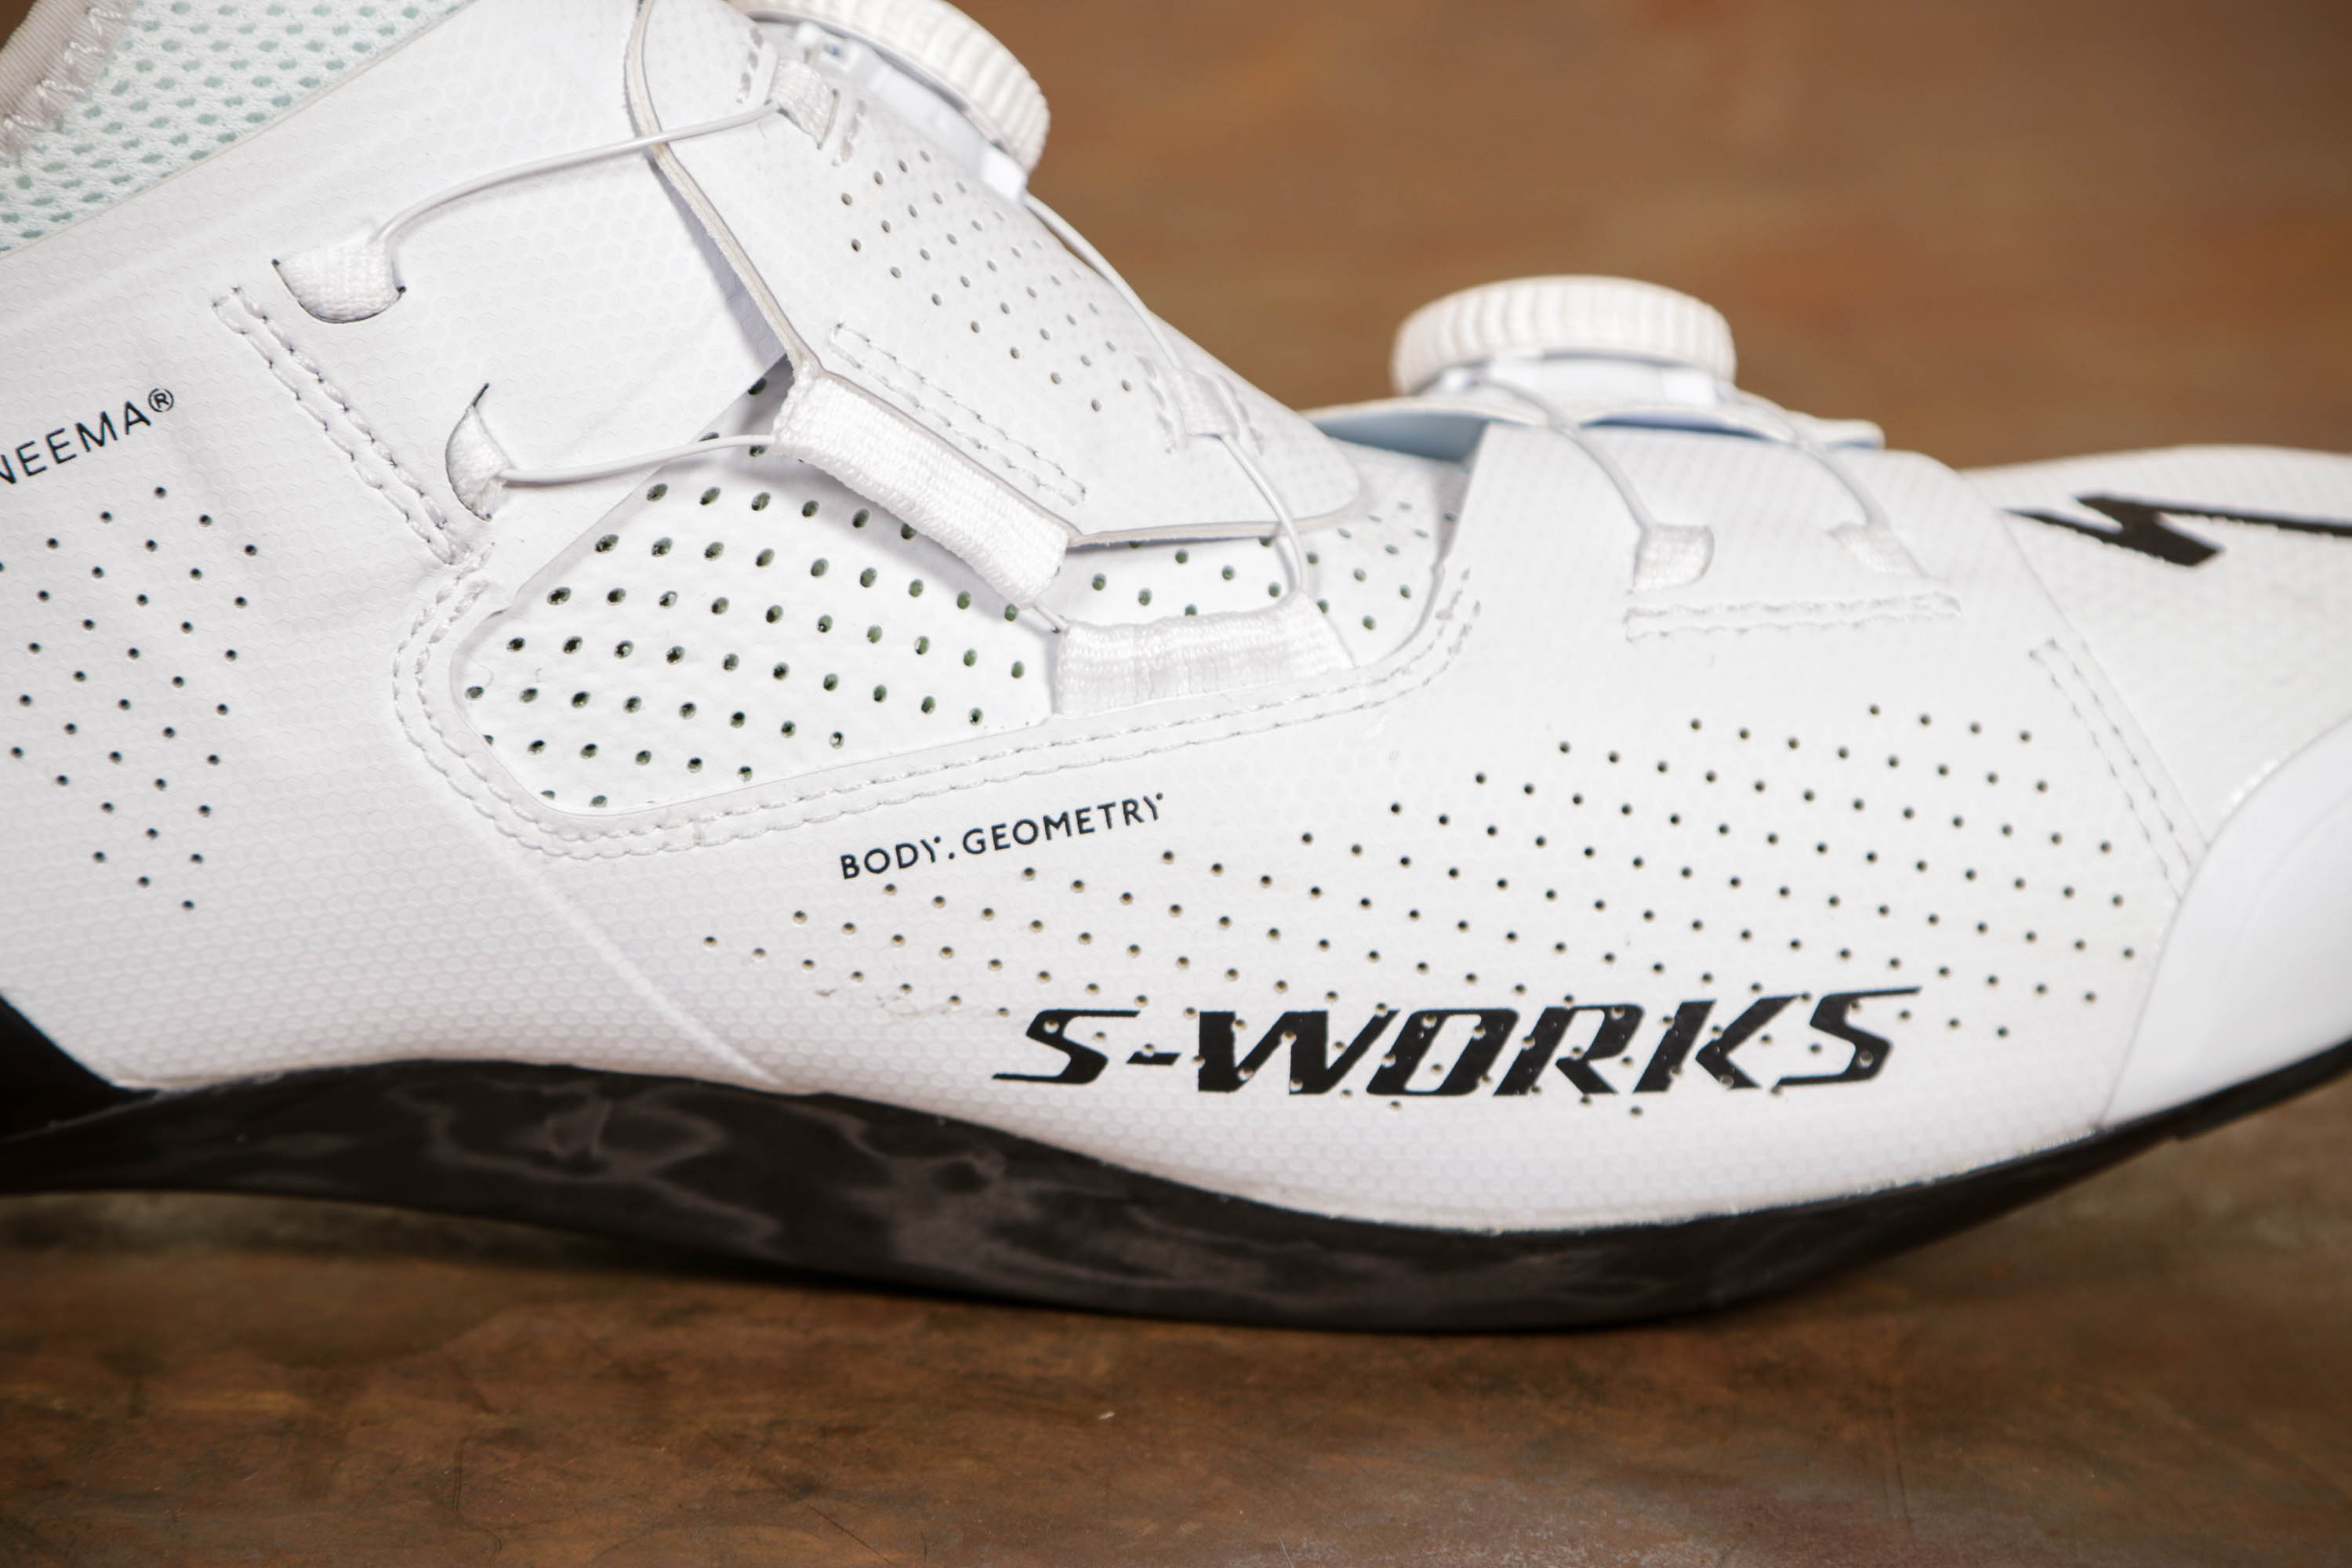 NEW S-WORKS ARES ROAD SHOE asakusa.sub.jp